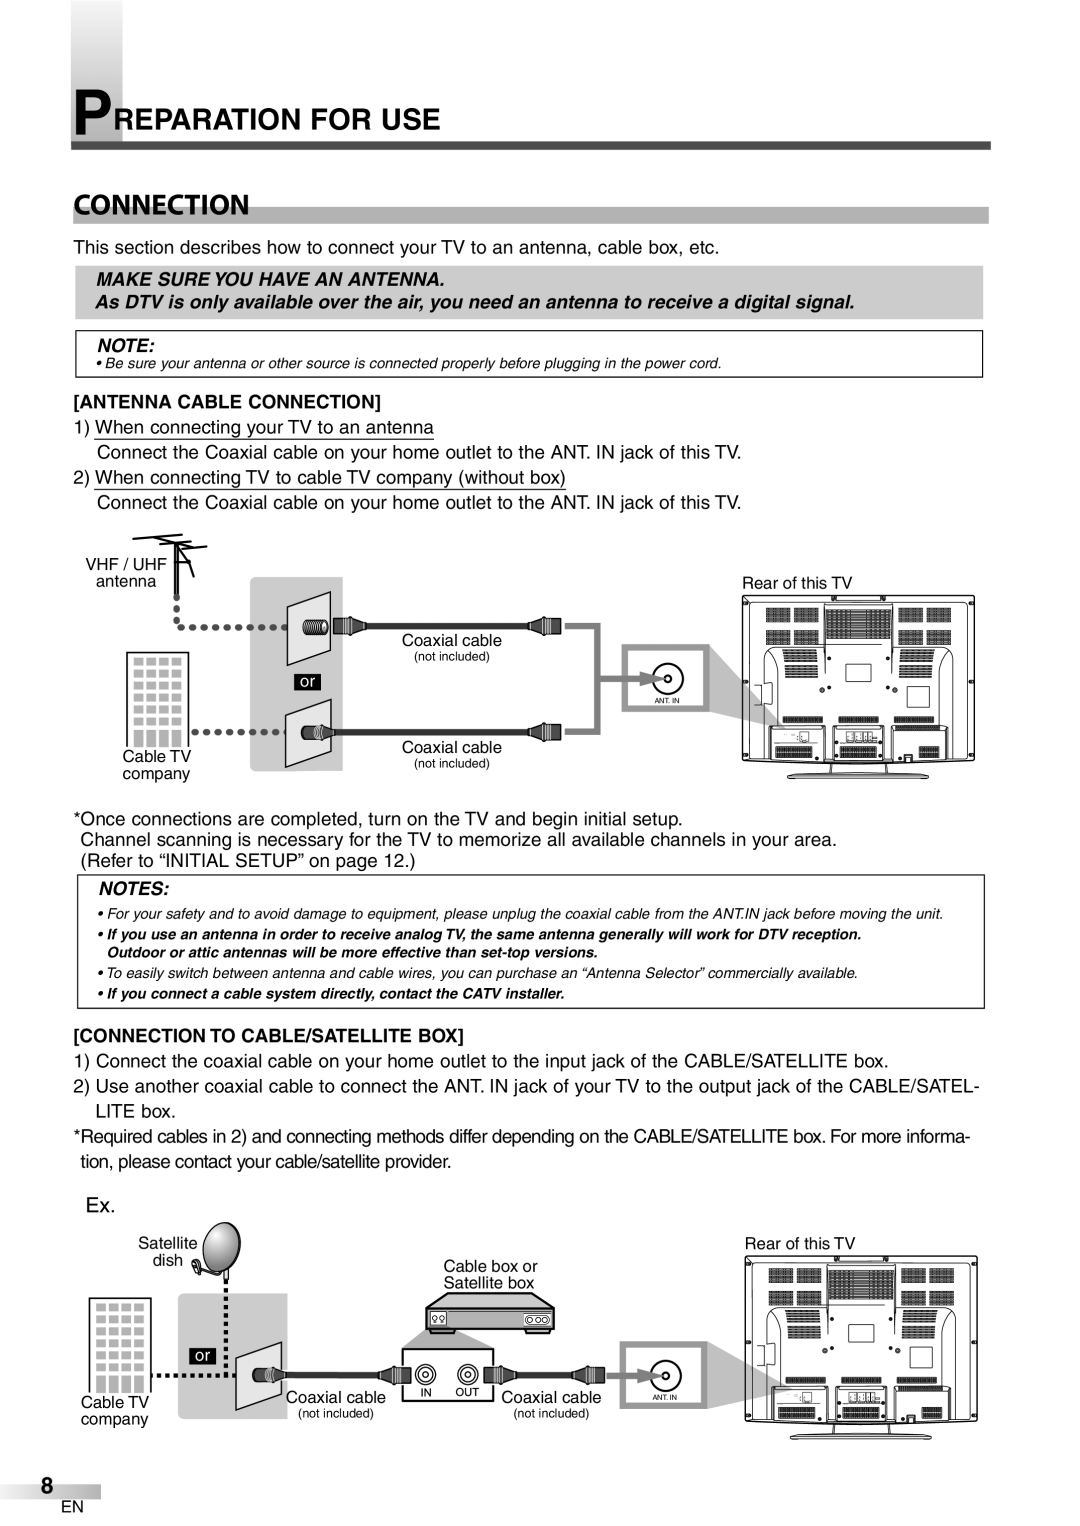 Emerson LC320EM8 owner manual Preparation For Use, Make Sure You Have An Antenna, Antenna Cable Connection 